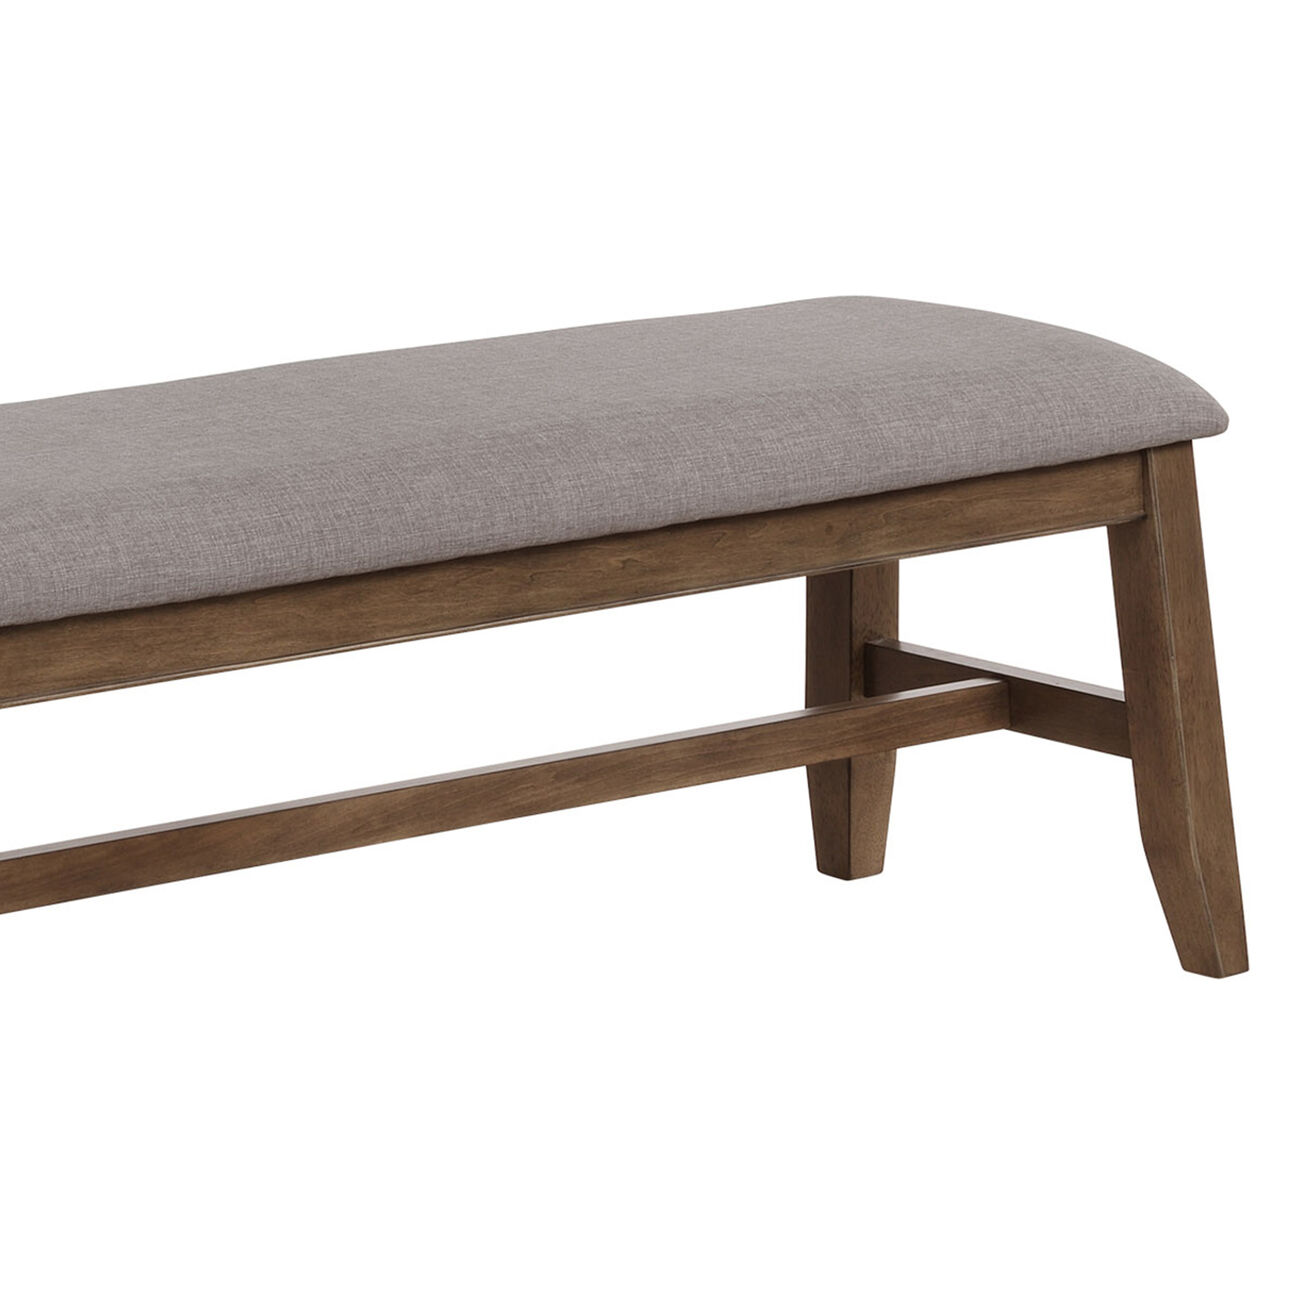 Wooden Bench with Fabric Upholstered Seat and Angled Legs, Brown and Gray - BM215445